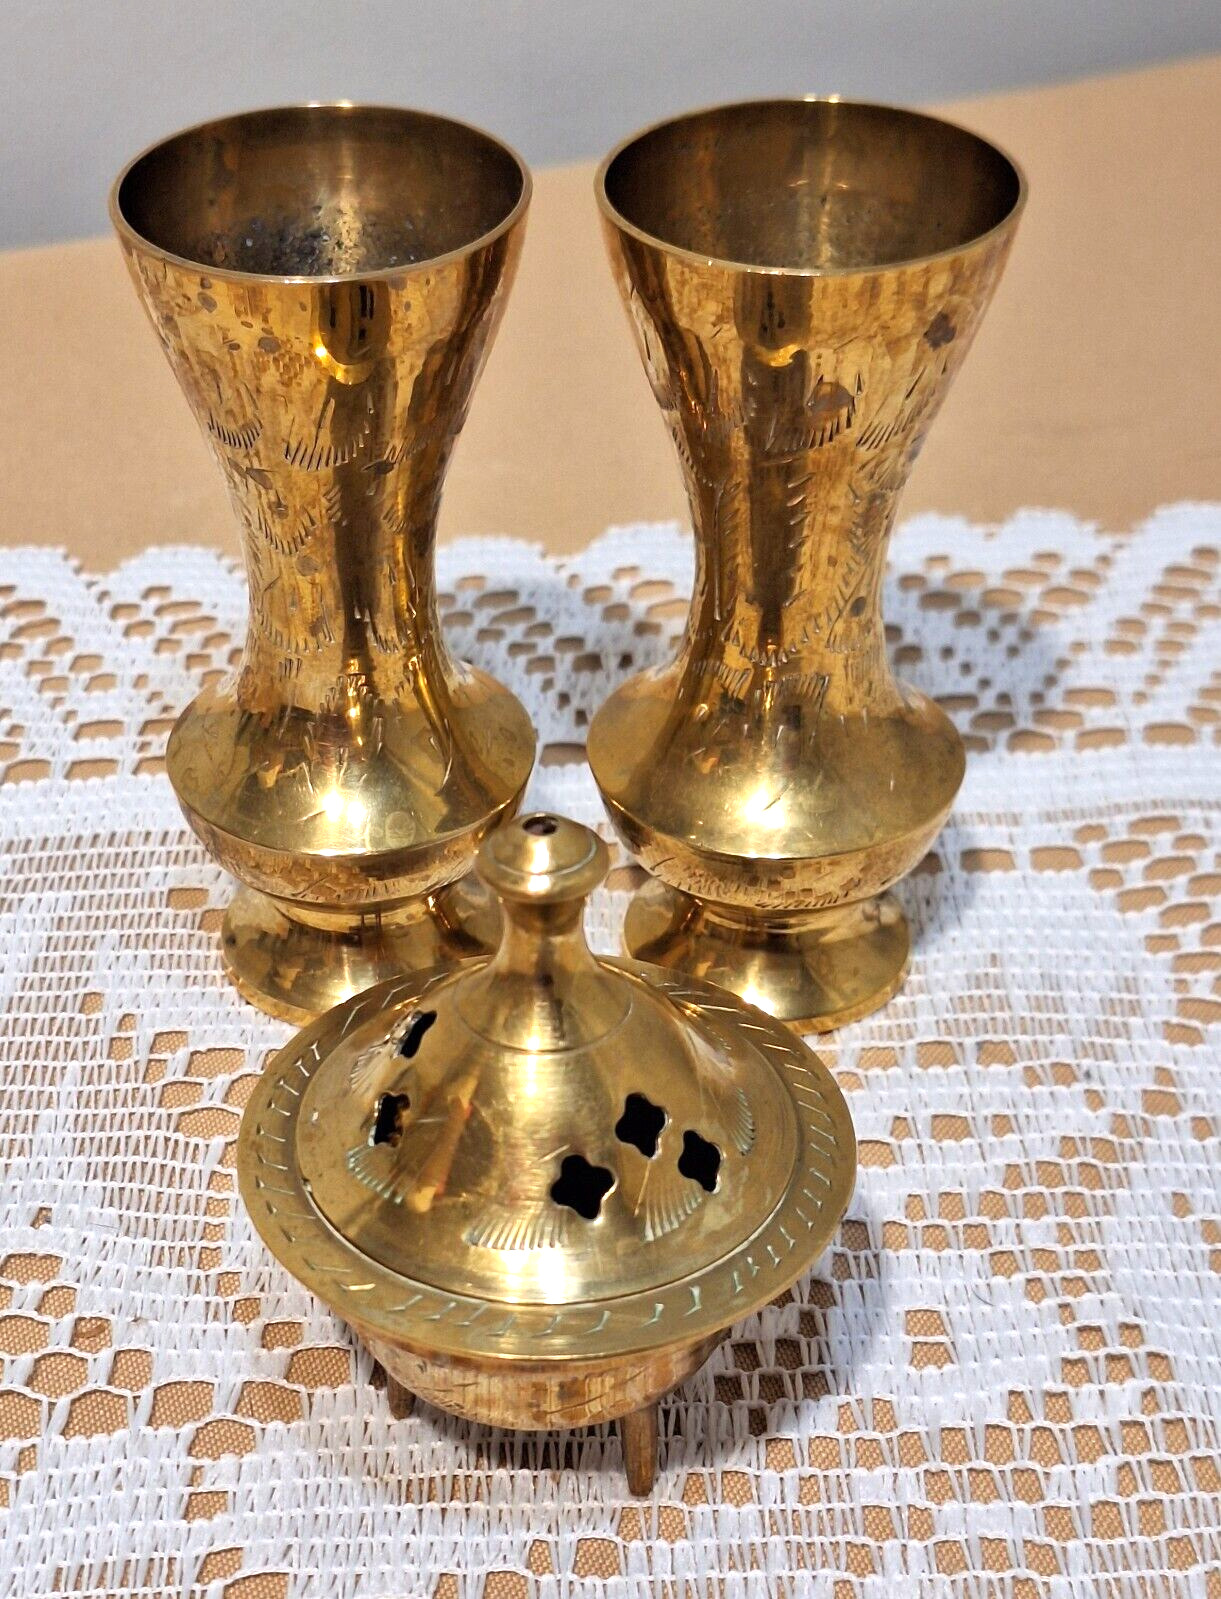 Vintage Brass Home Decor Pieces, Bud Vases and Incense Burner, Lot of 4, India